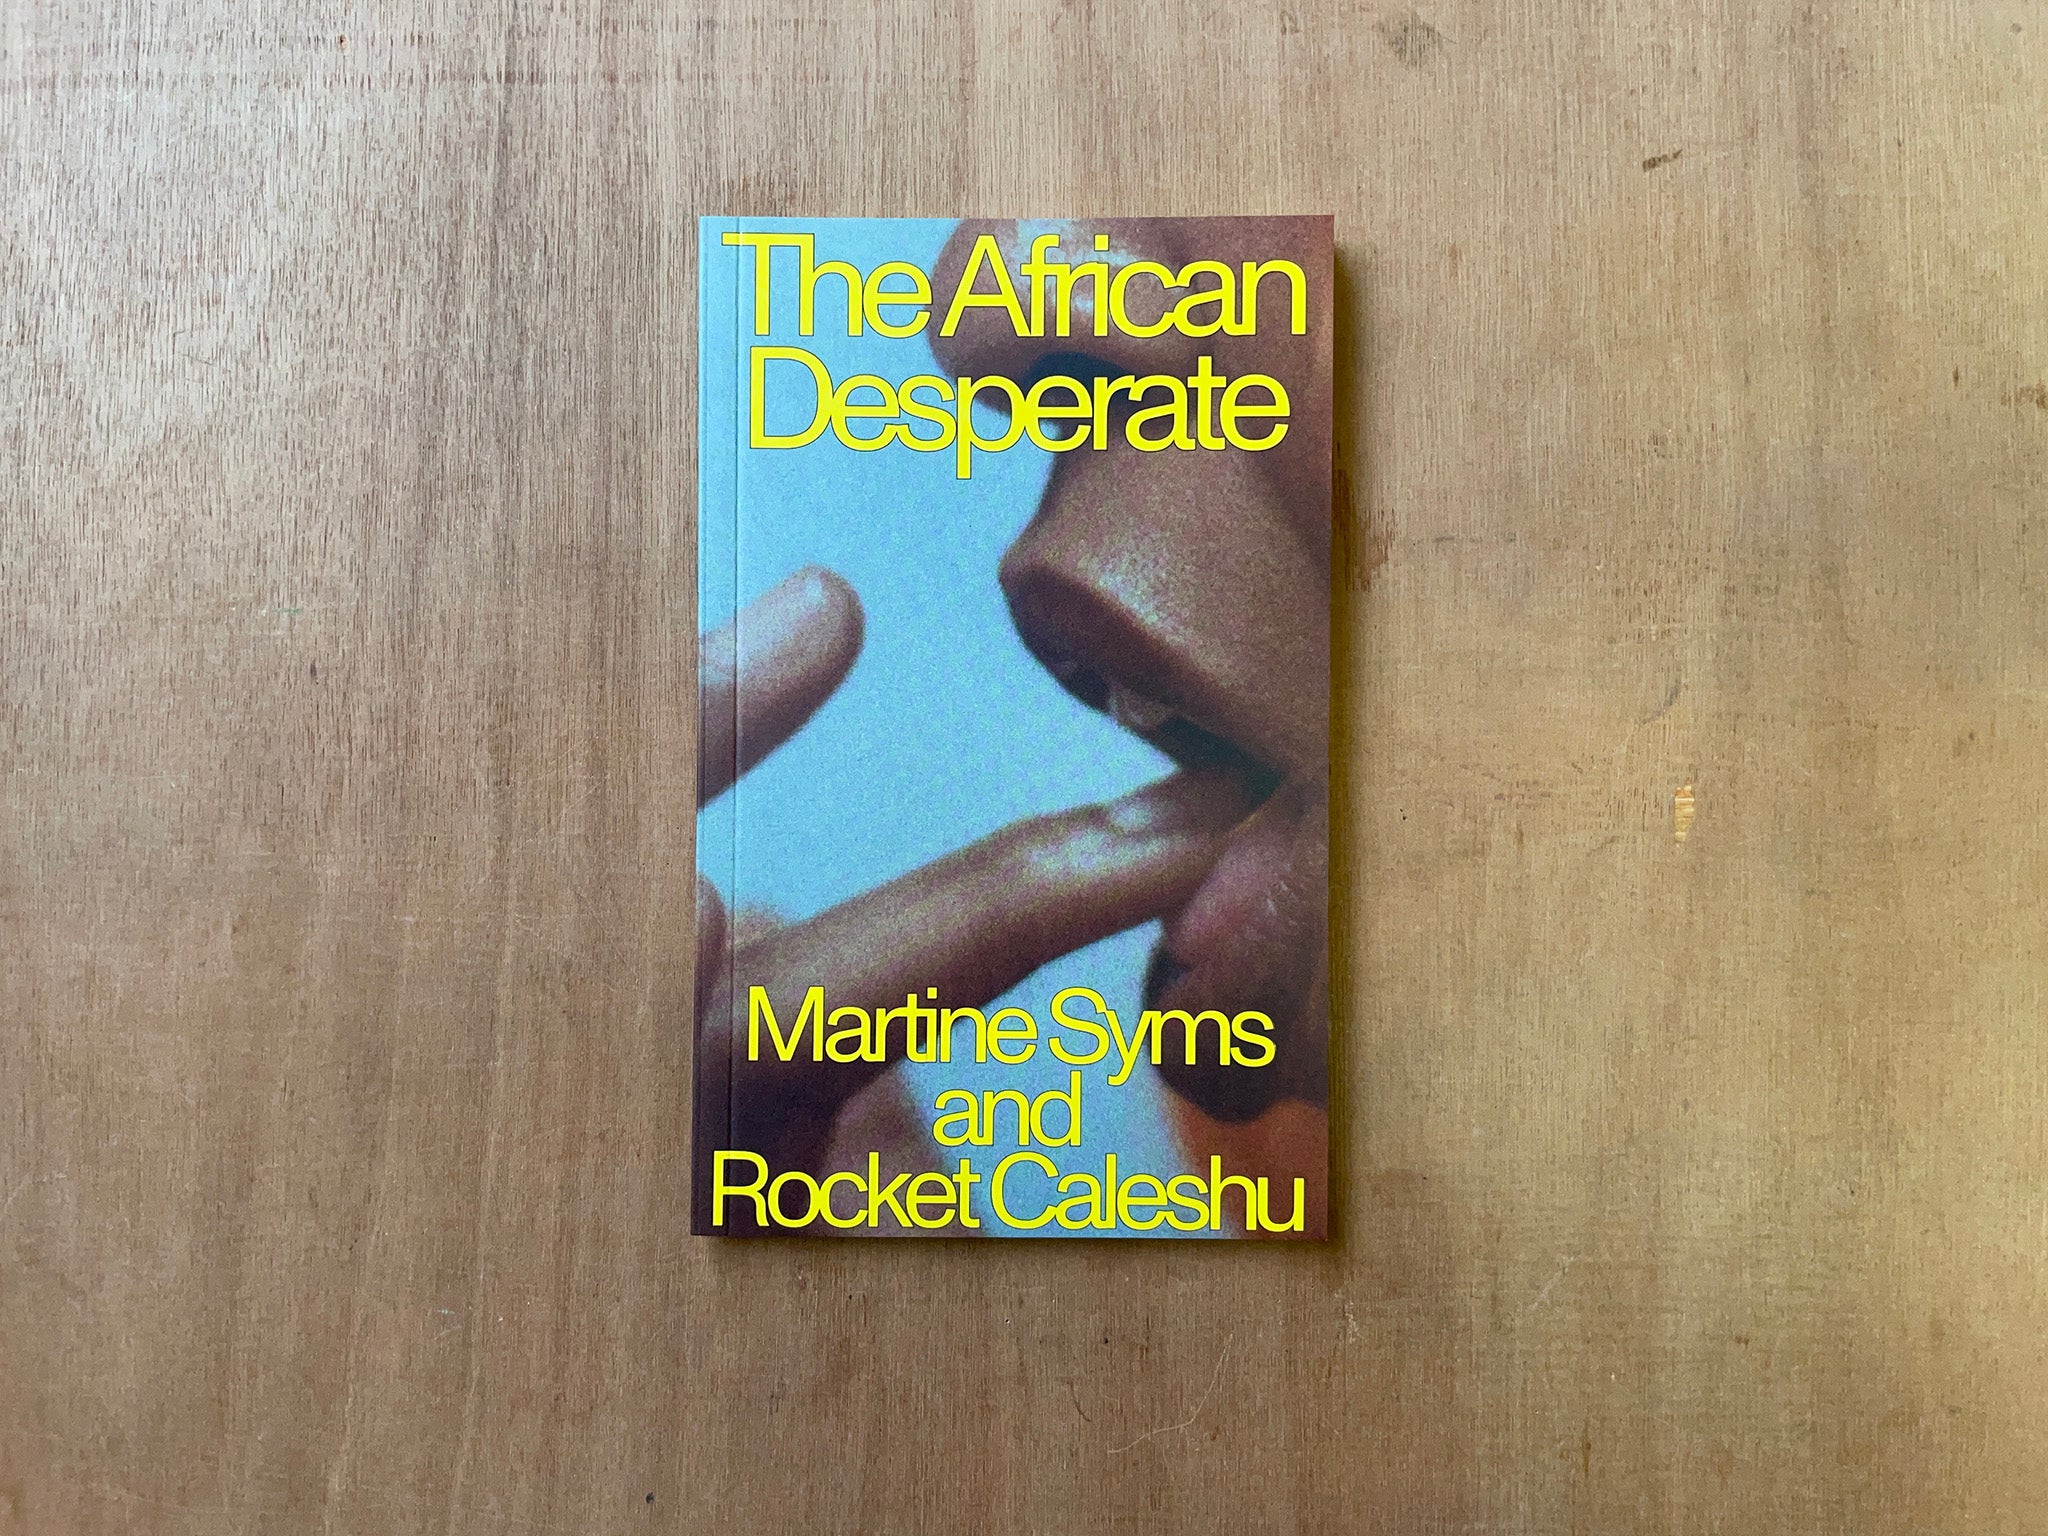 THE AFRICAN DESPERATE by Martine Syms & Rocket Caleshu